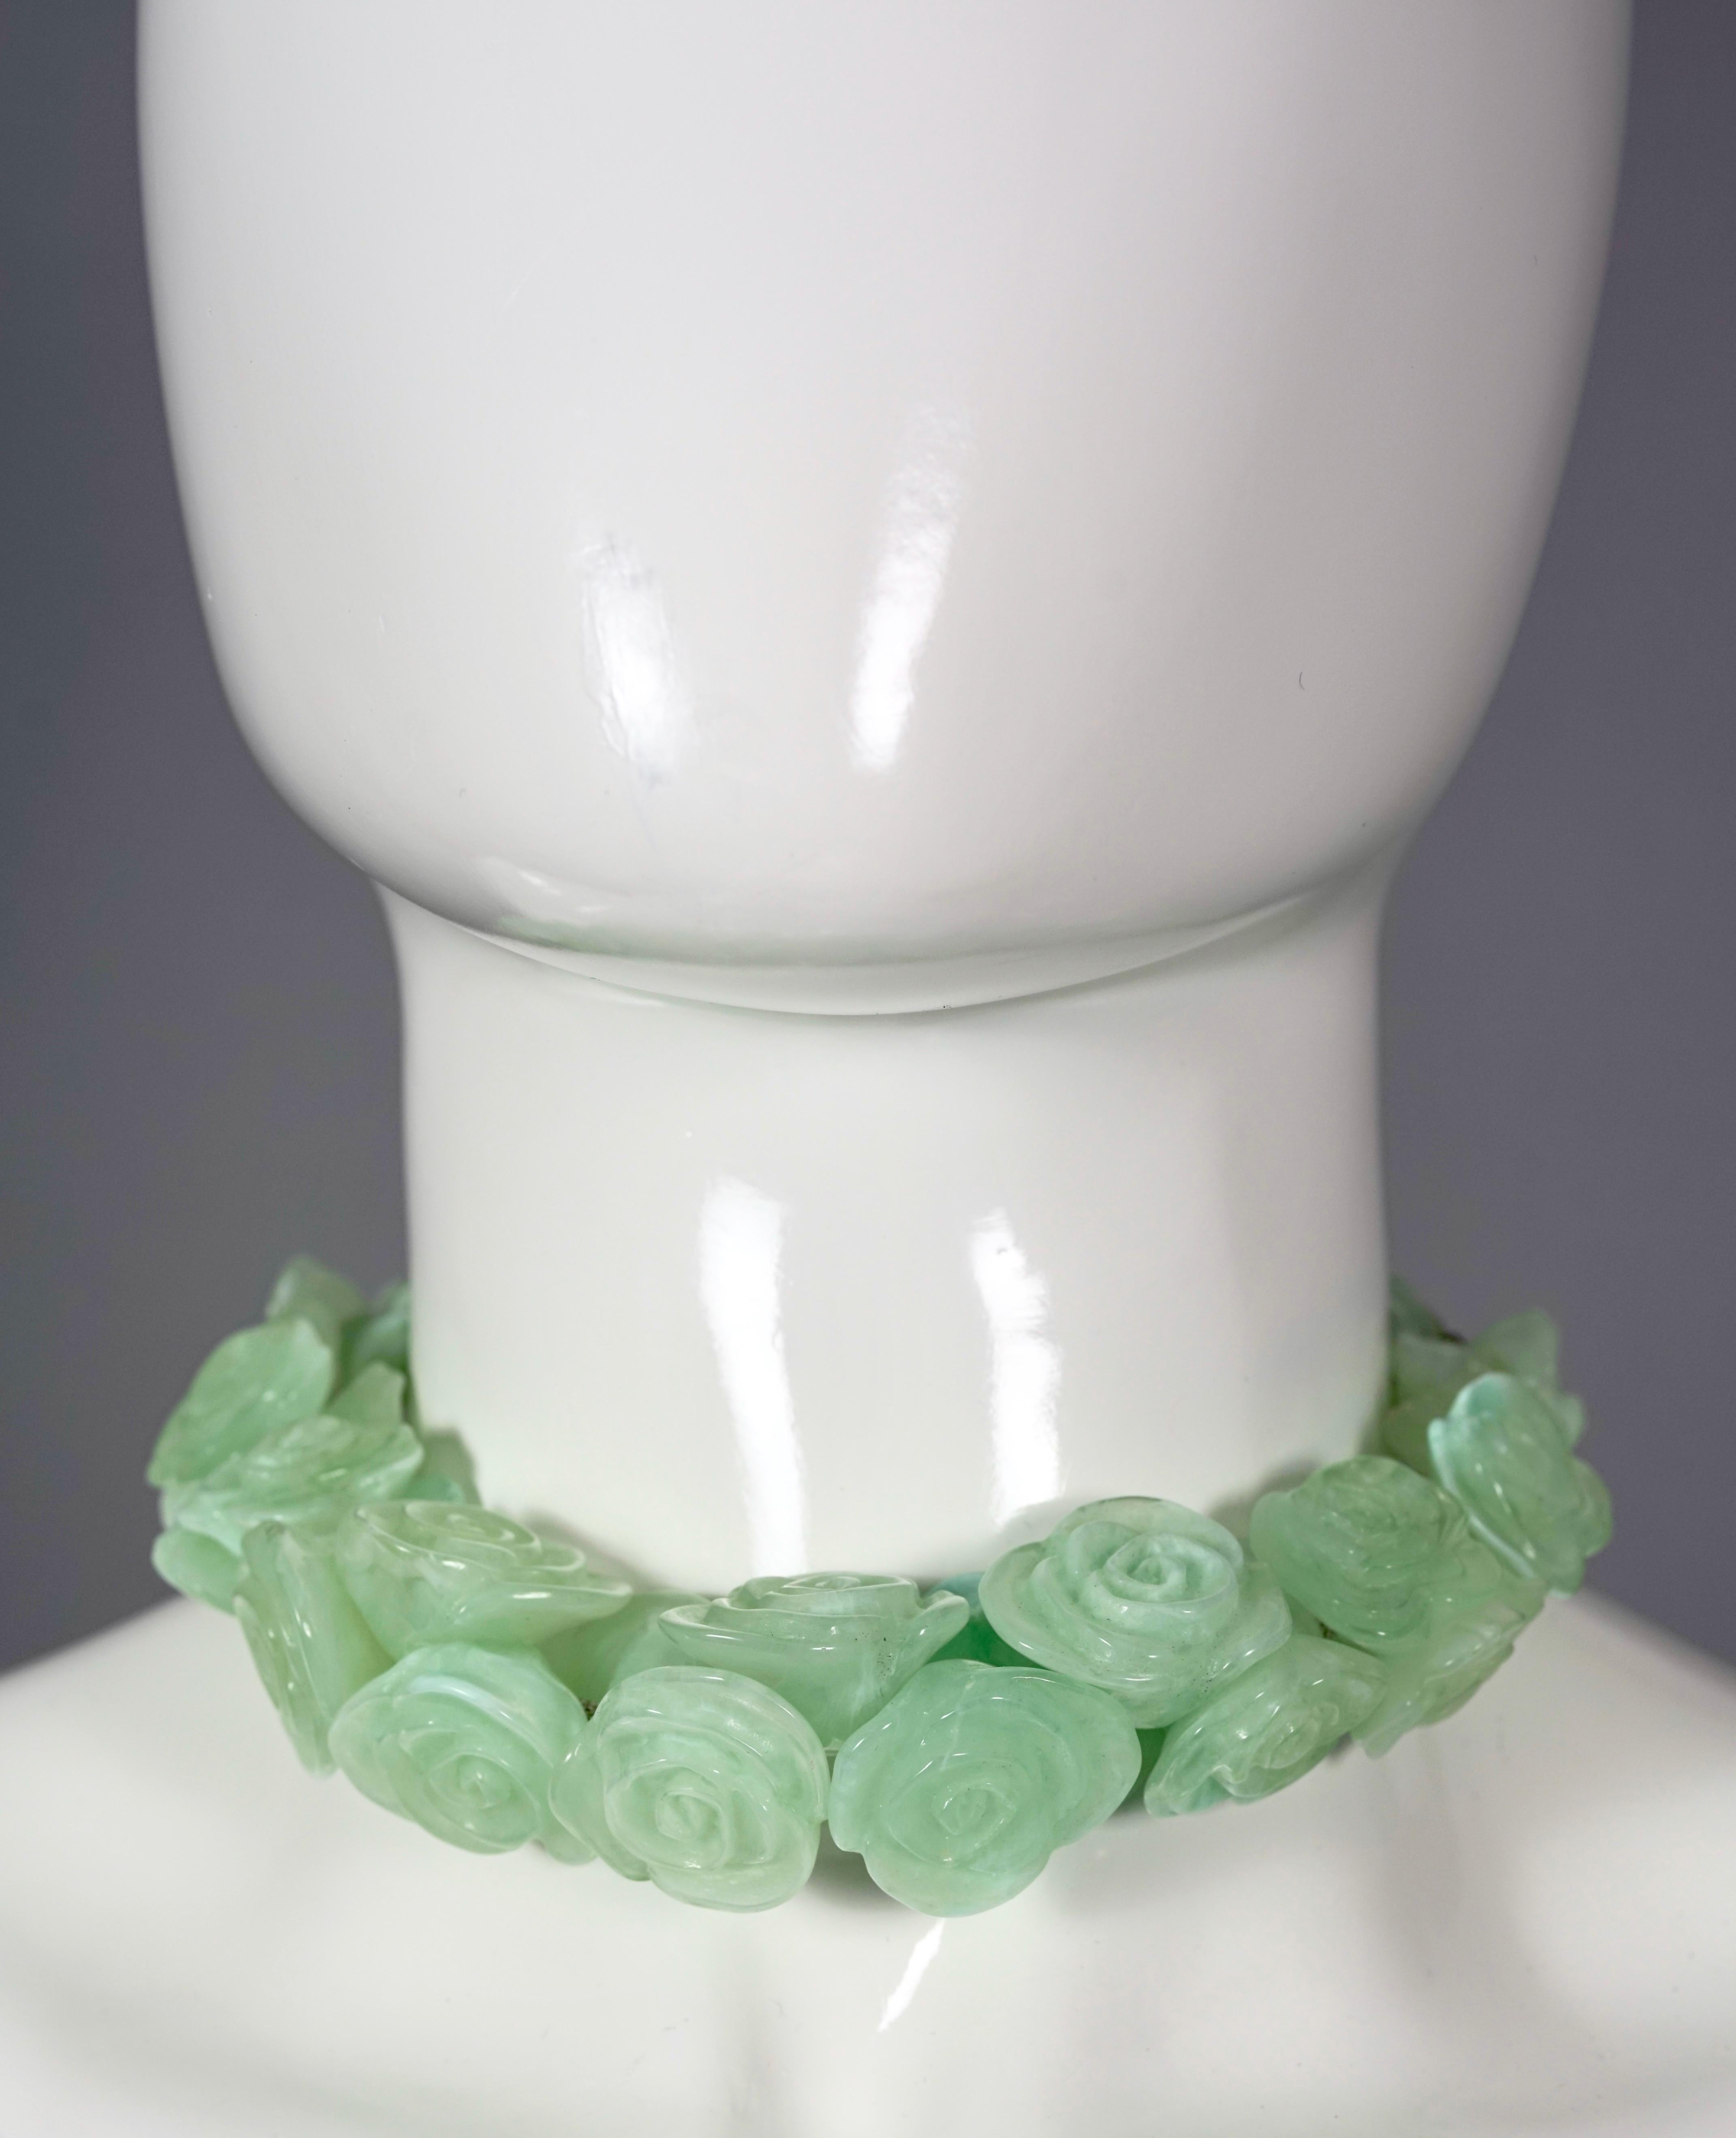 Vintage 2002 CHANEL Logo Camellia Resin Flower Necklace

Measurements:
Large Camellia: 1.25 inches (3.2 cm)
Total Length: 31.49 inches (80 cm)

Features:
- 100% Authentic CHANEL.
- Iconic Chanel camellia resin flowers in green color.
- Random metal